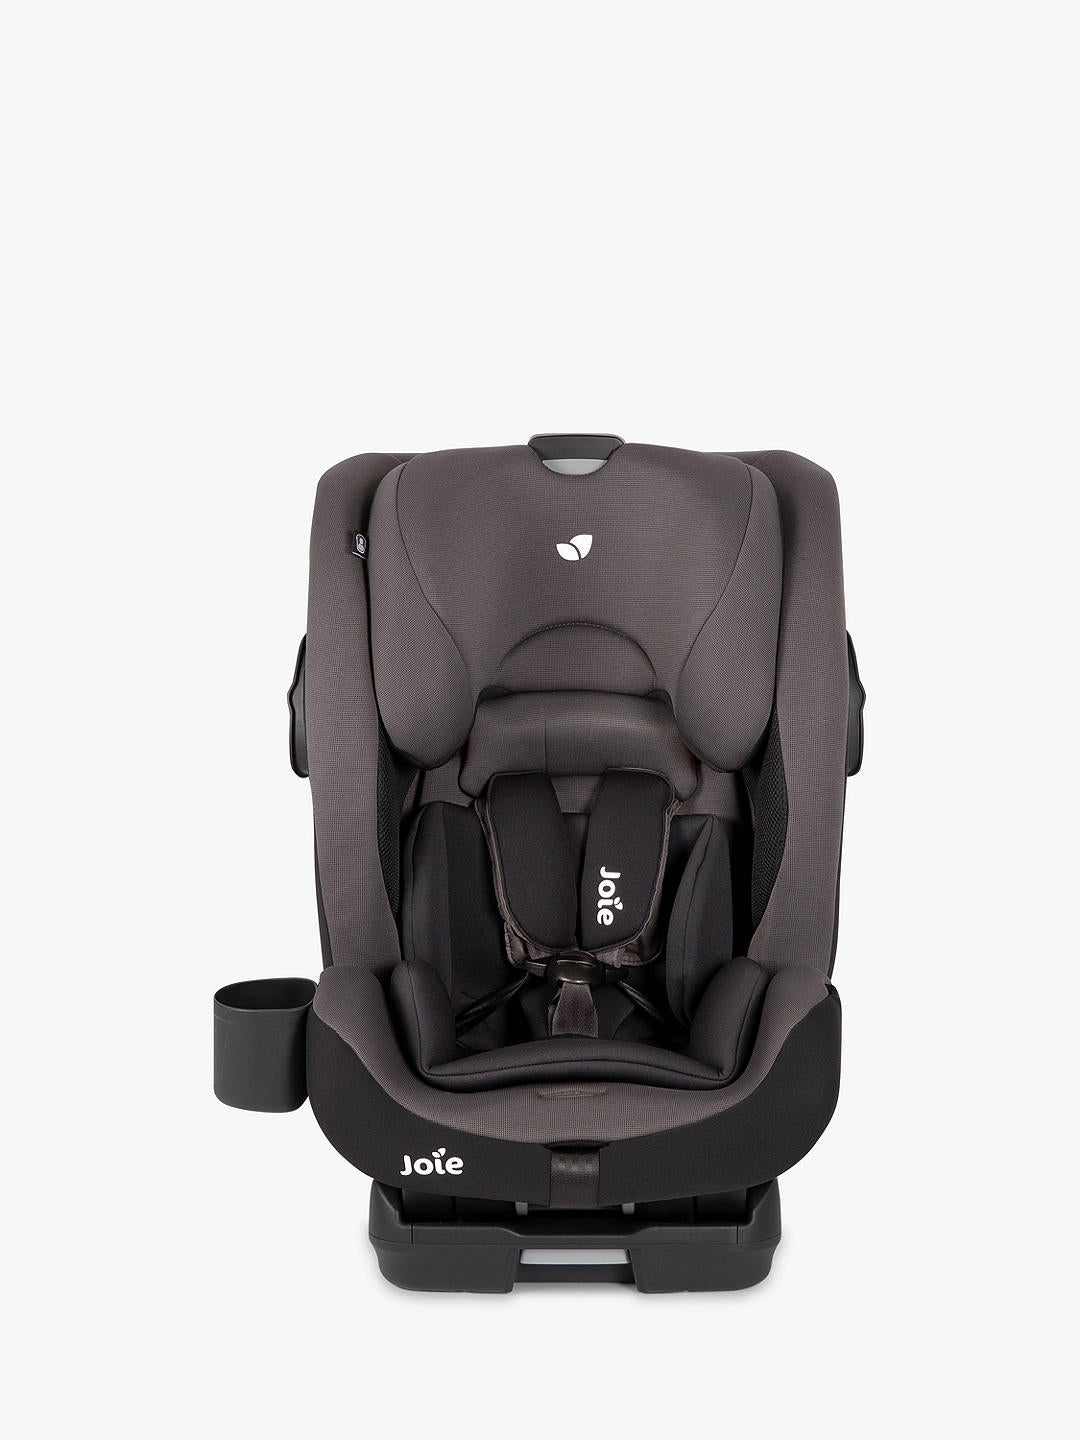 Joie Bold Group 1/2/3 Isofix Toddler Car Seat